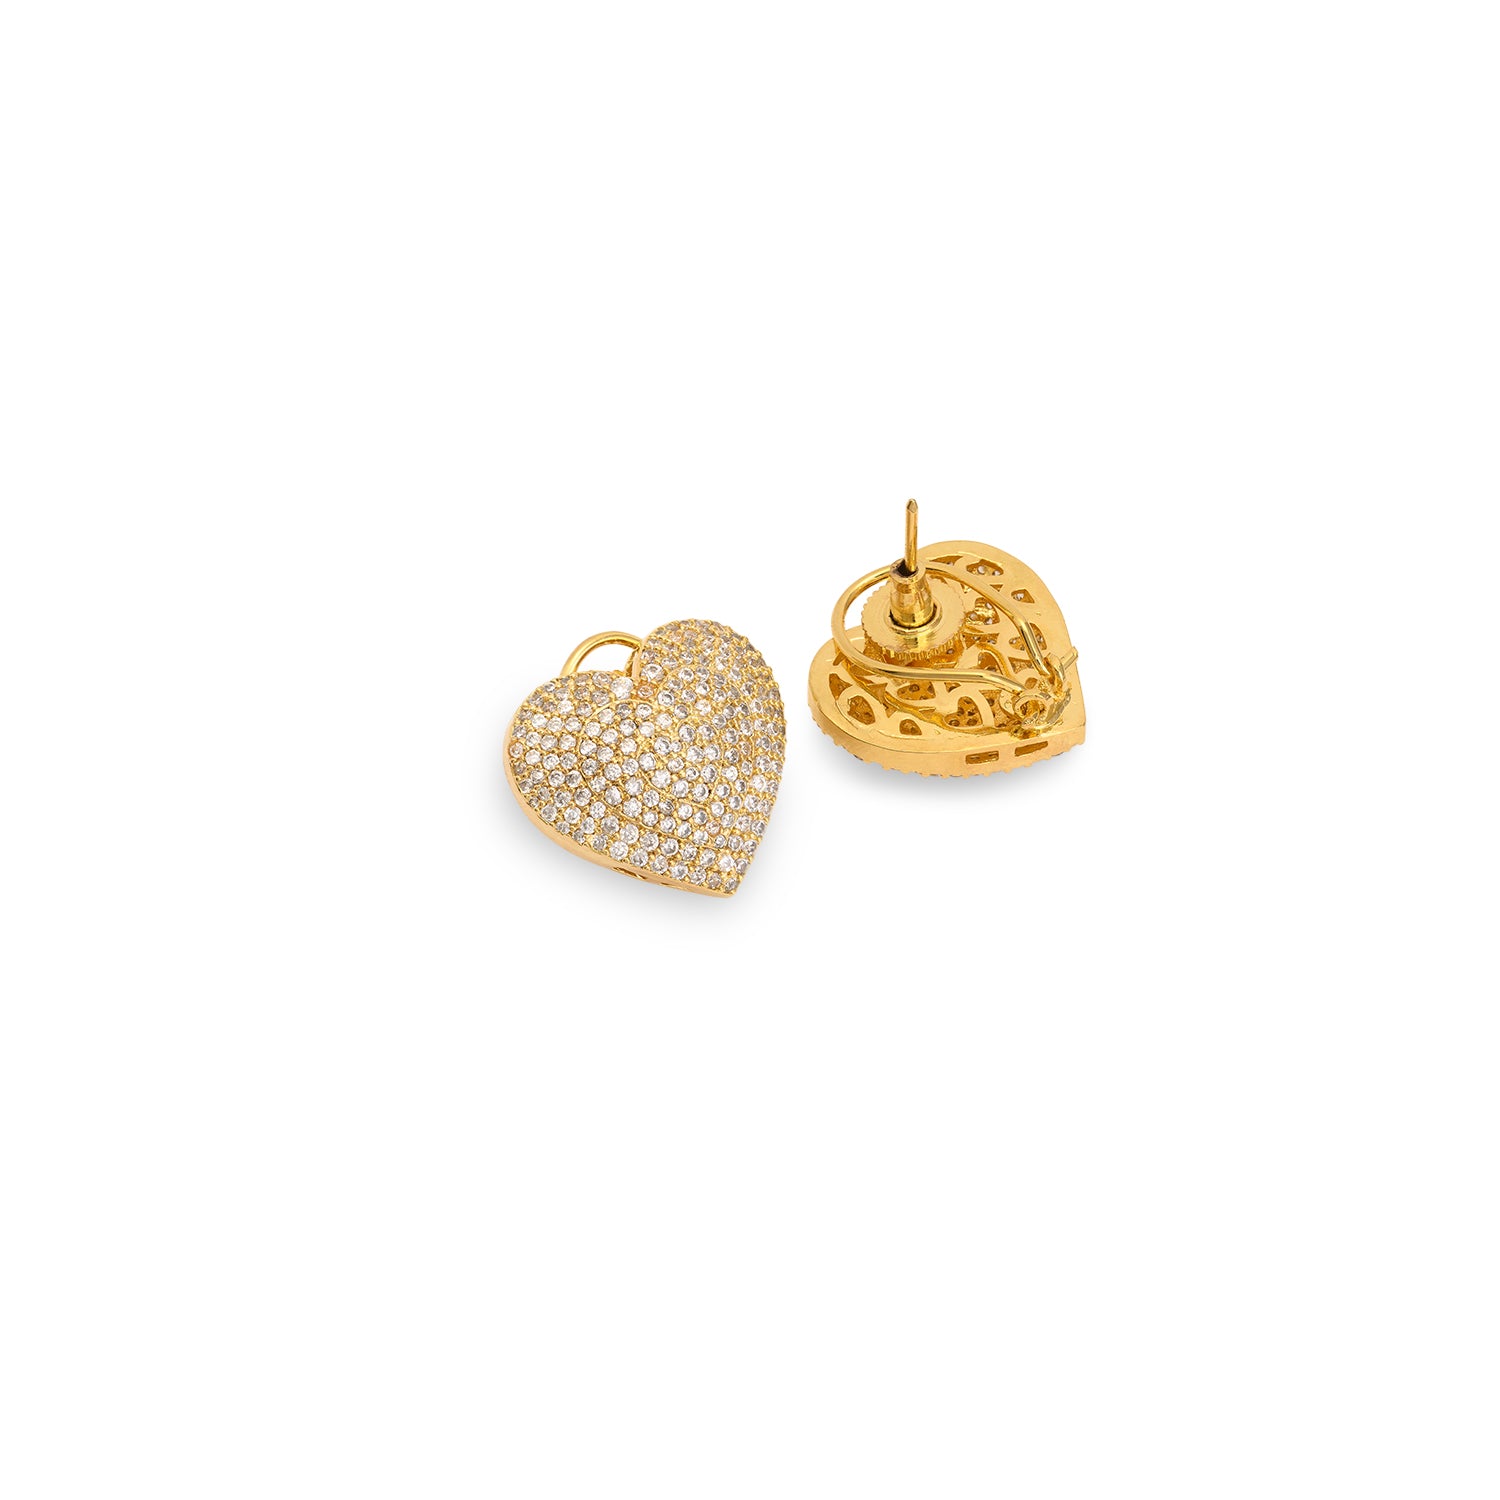 18K Gold Plated Heart Studs with White Diamonte Detail